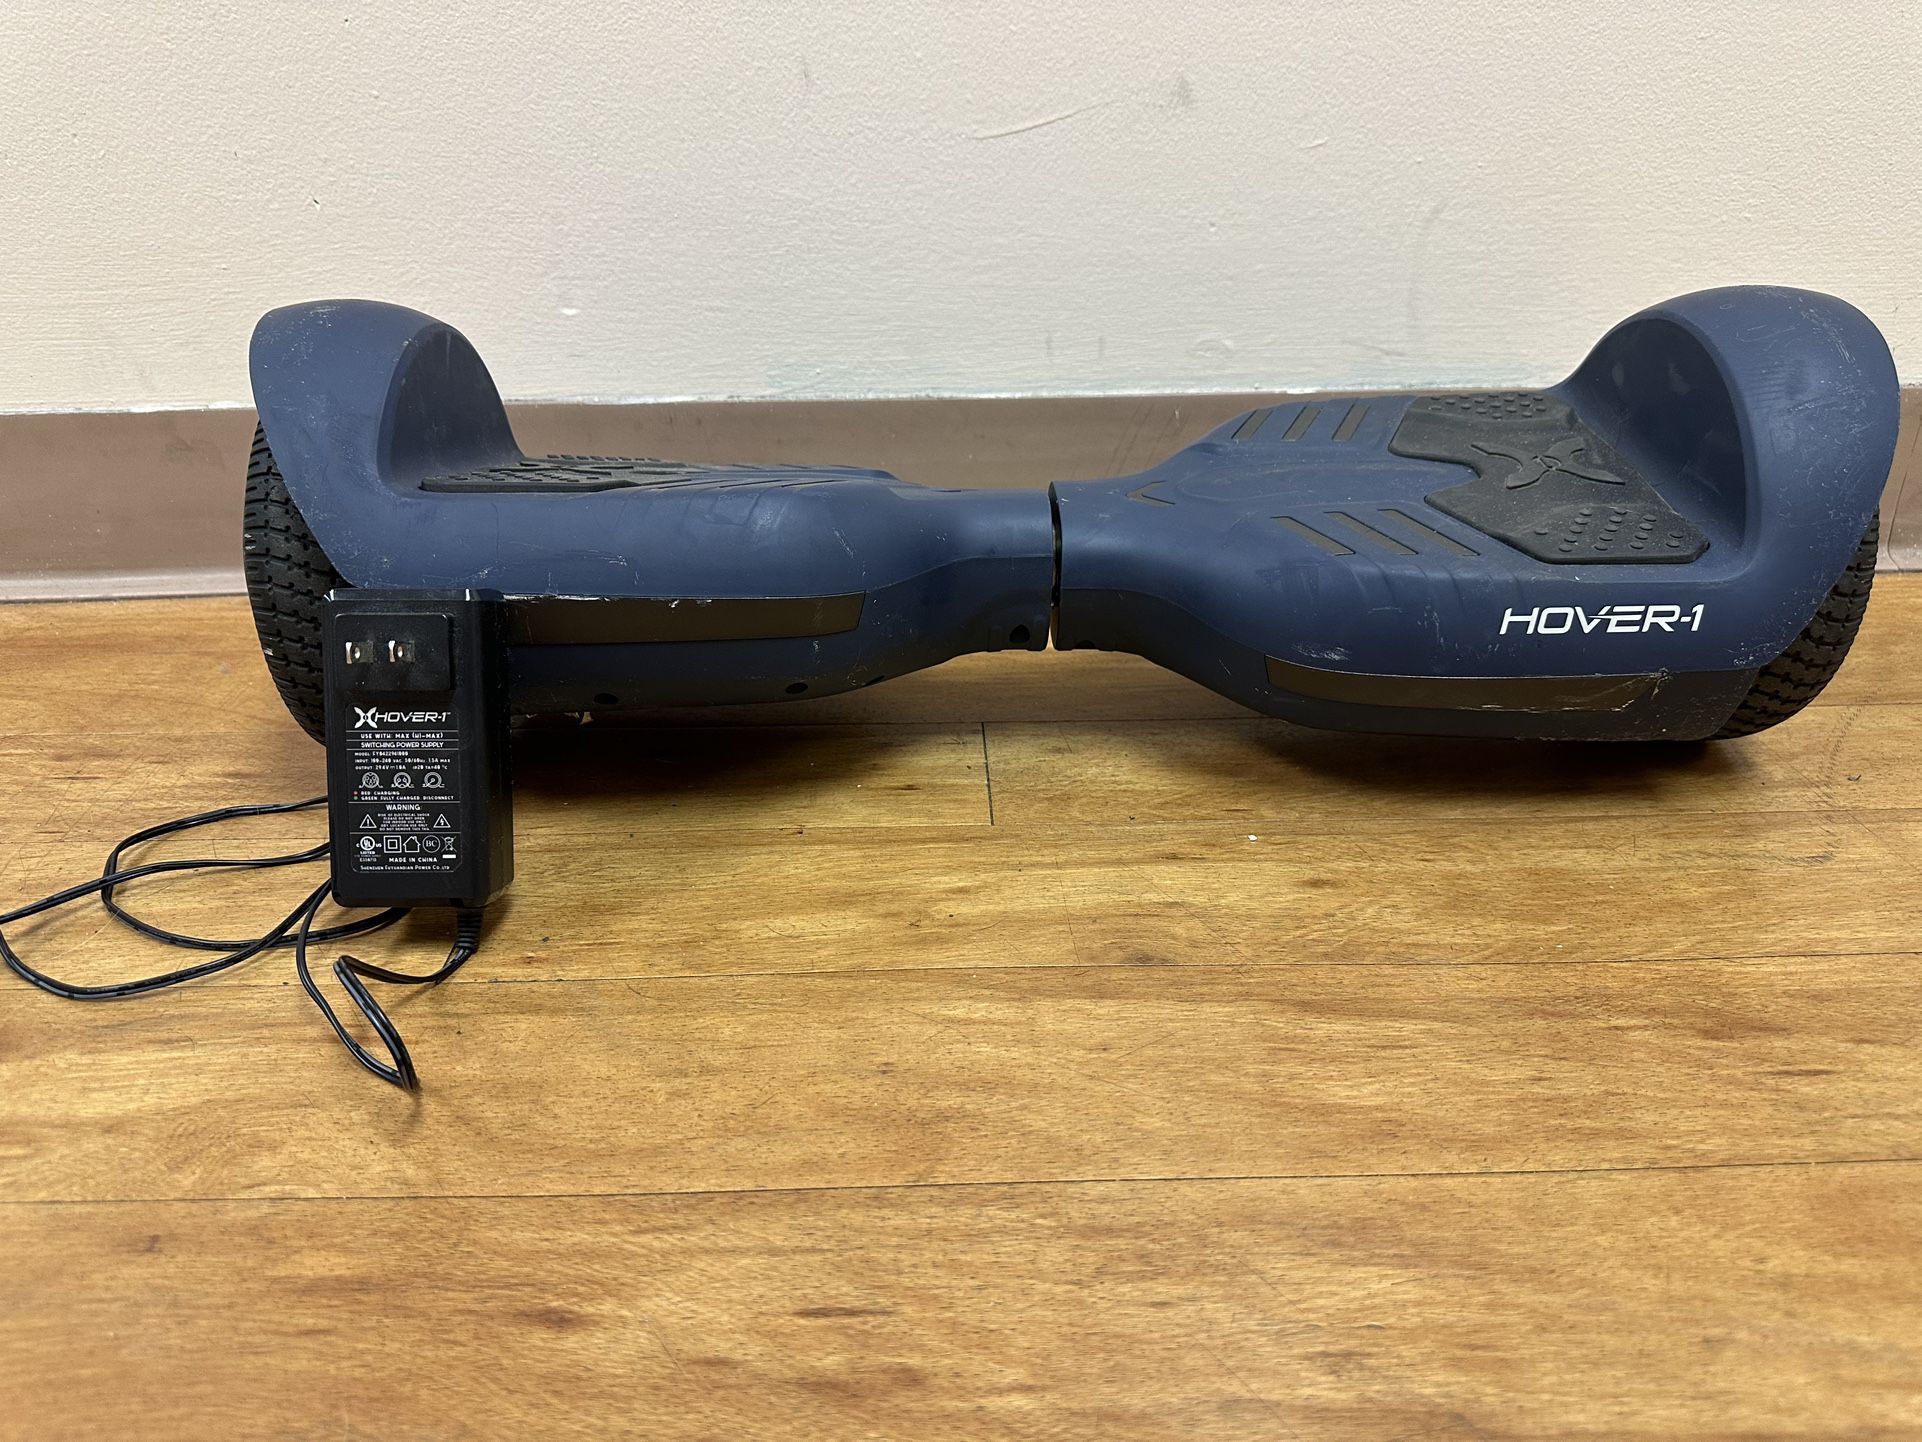 X-Hover-1 Hoverboard